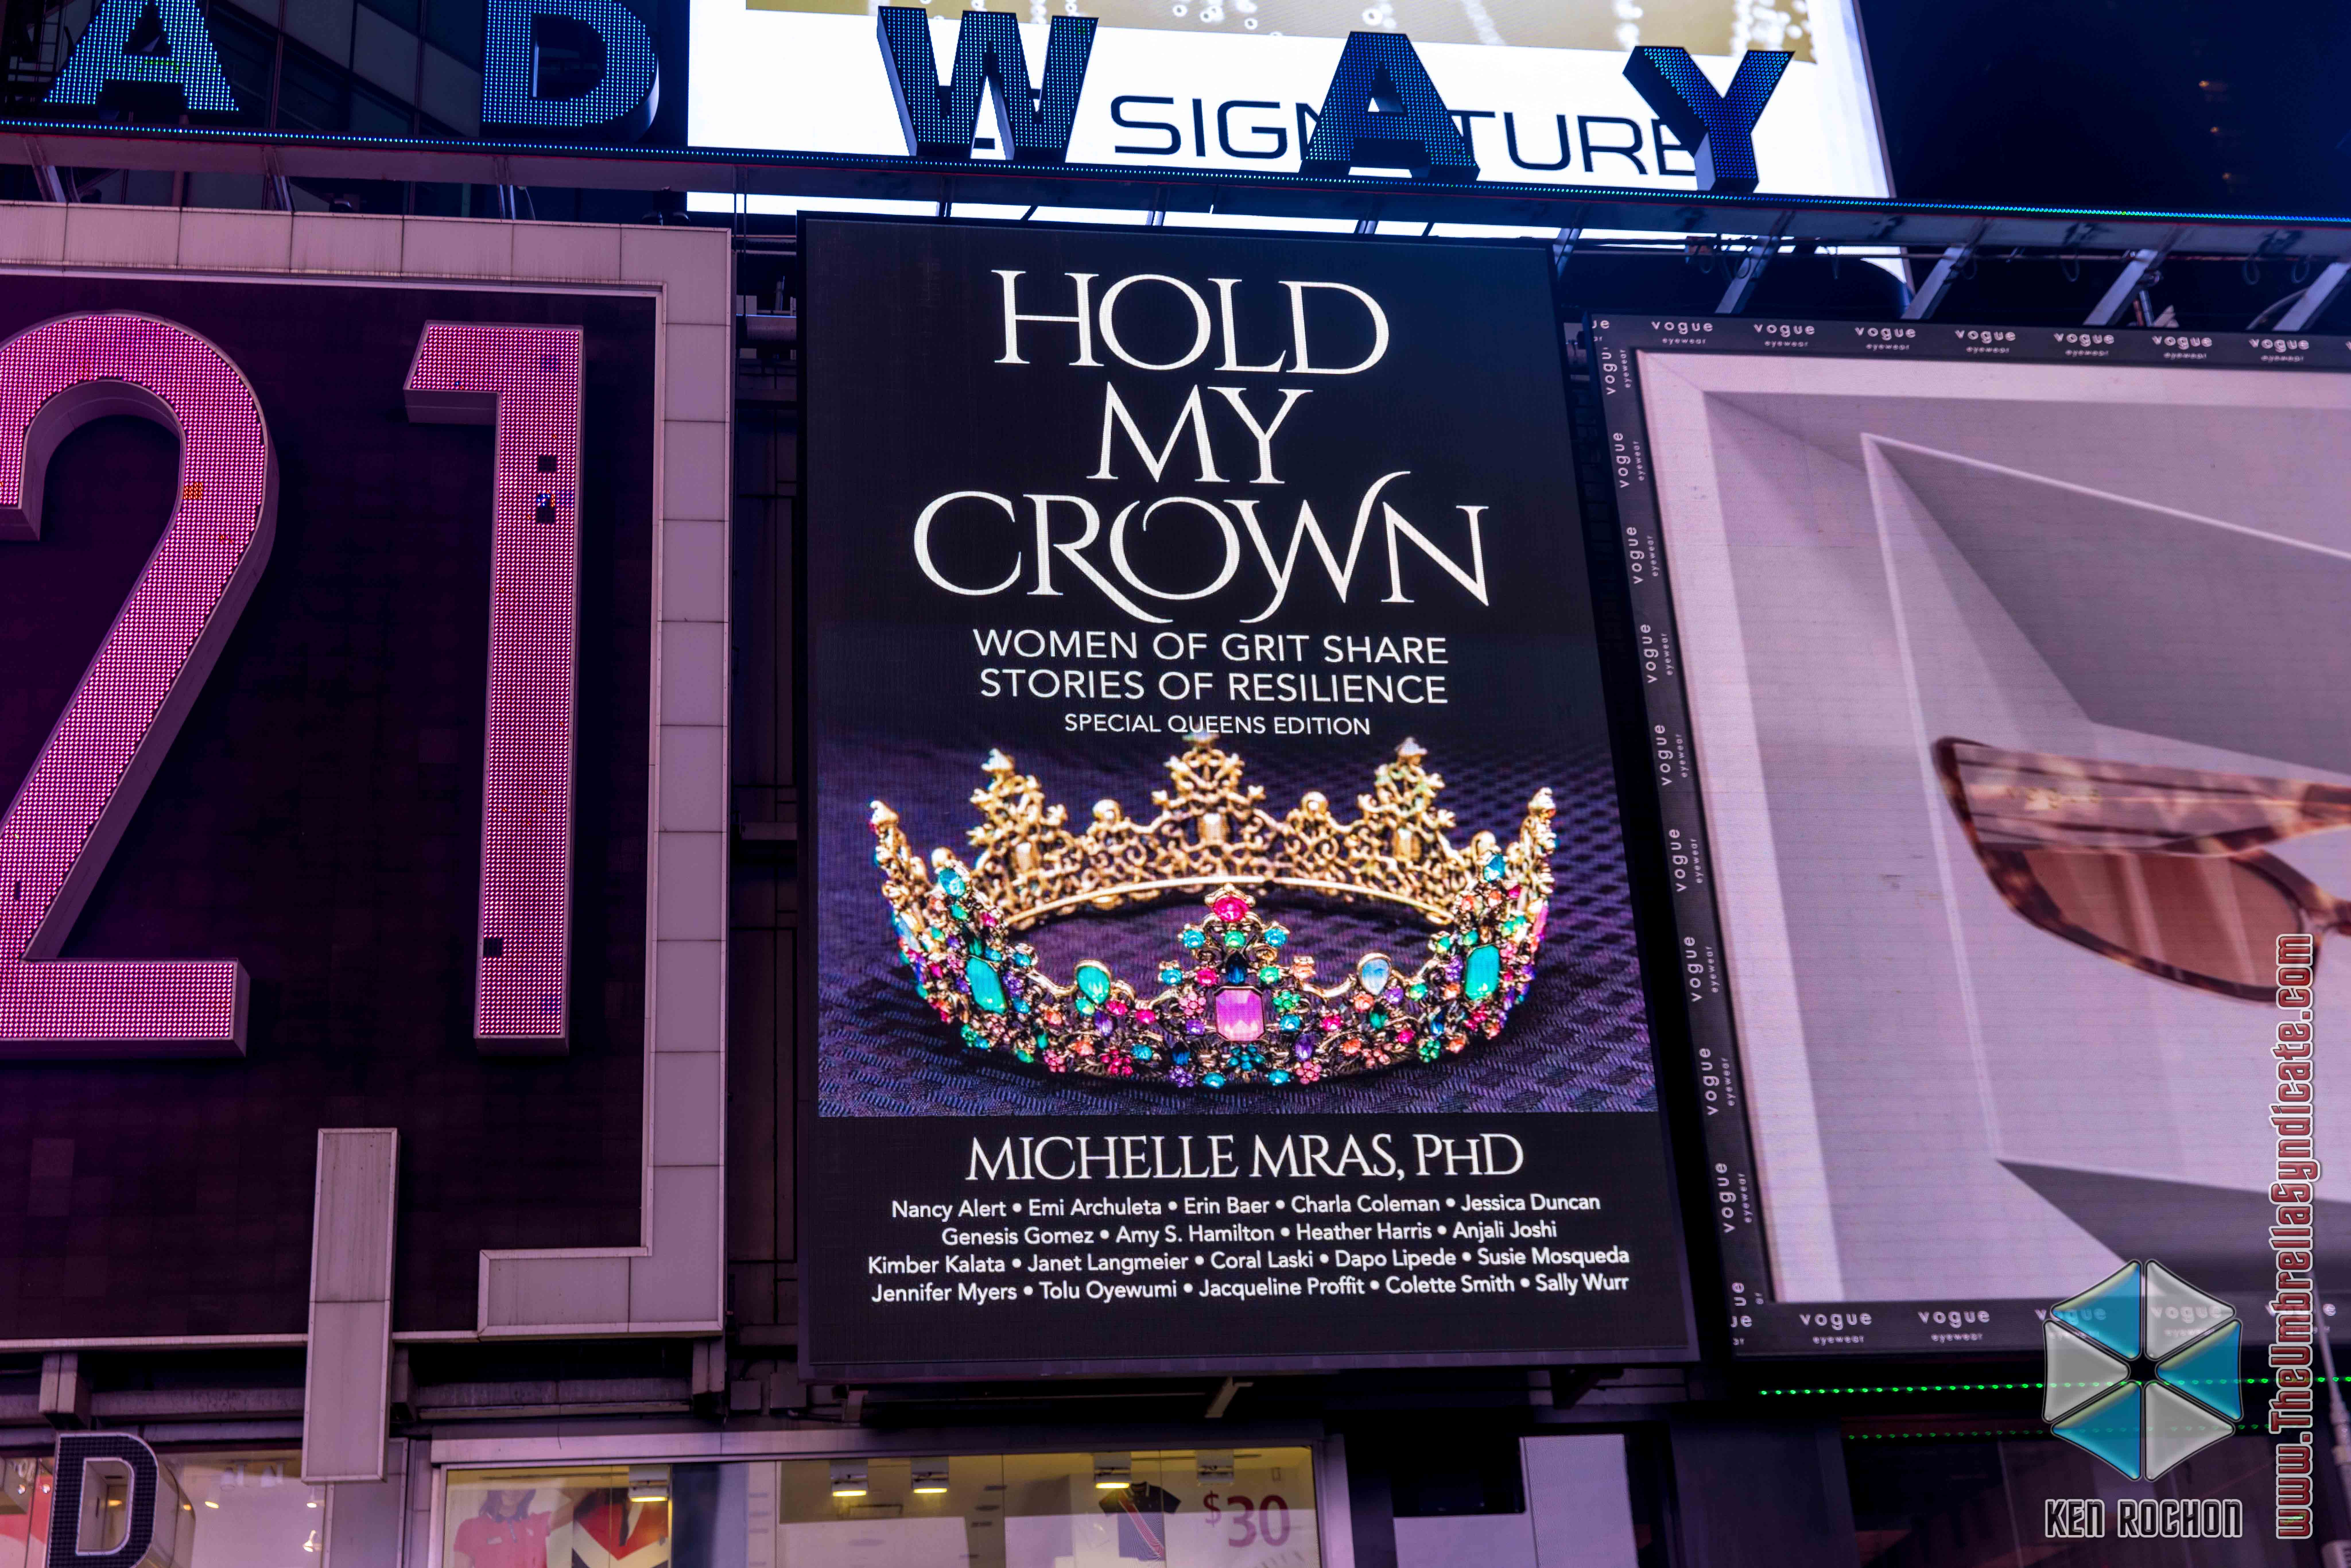 A picture of Hold My Crown featured in Times Square in New York City.